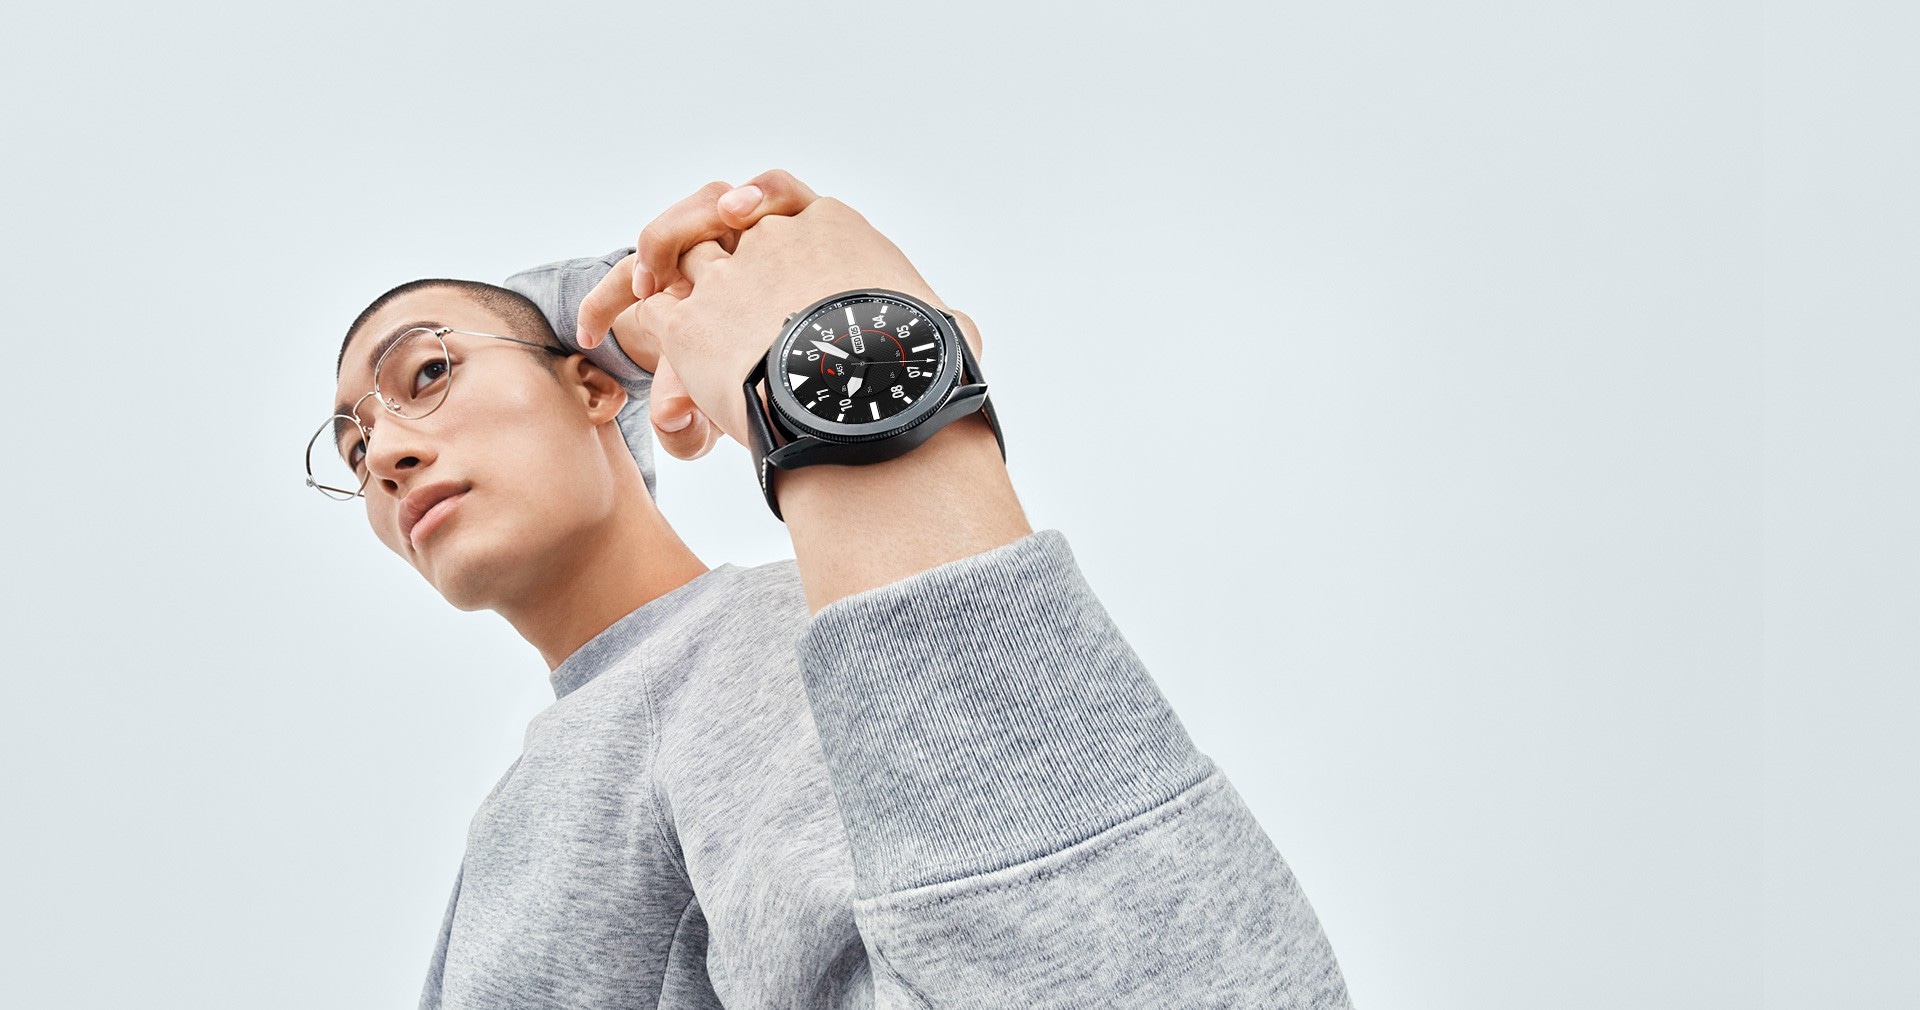 Man stretches his arms behind his back, showing off a 45mm Galaxy Watch3 in Mystic Black on his wrist with a Sporty Classic Watch Face.